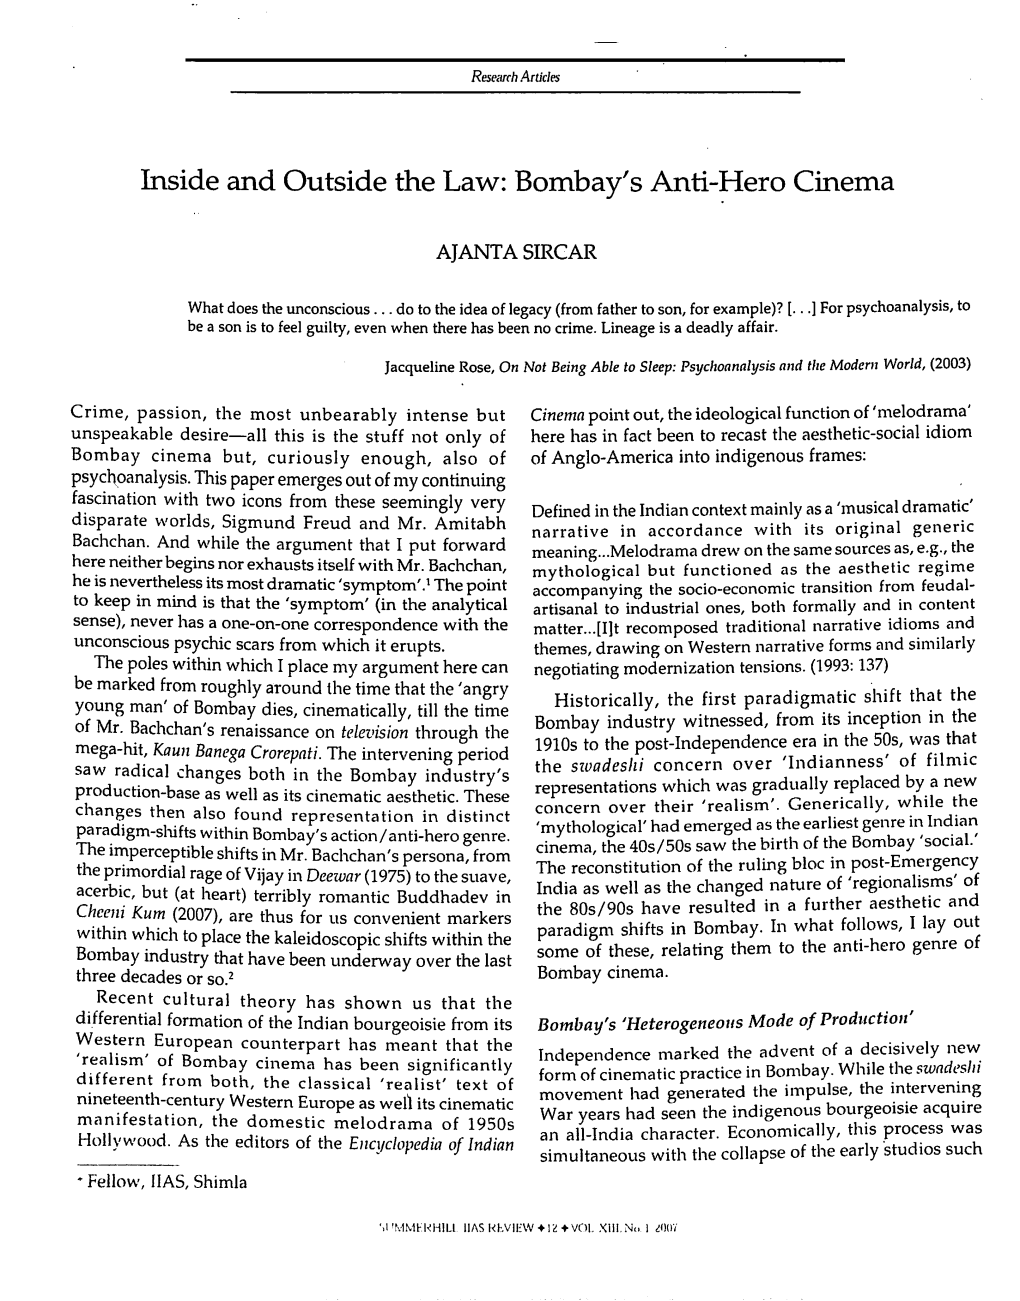 Inside and Outside the Law: Bombay's Anti-~Ero Cinema